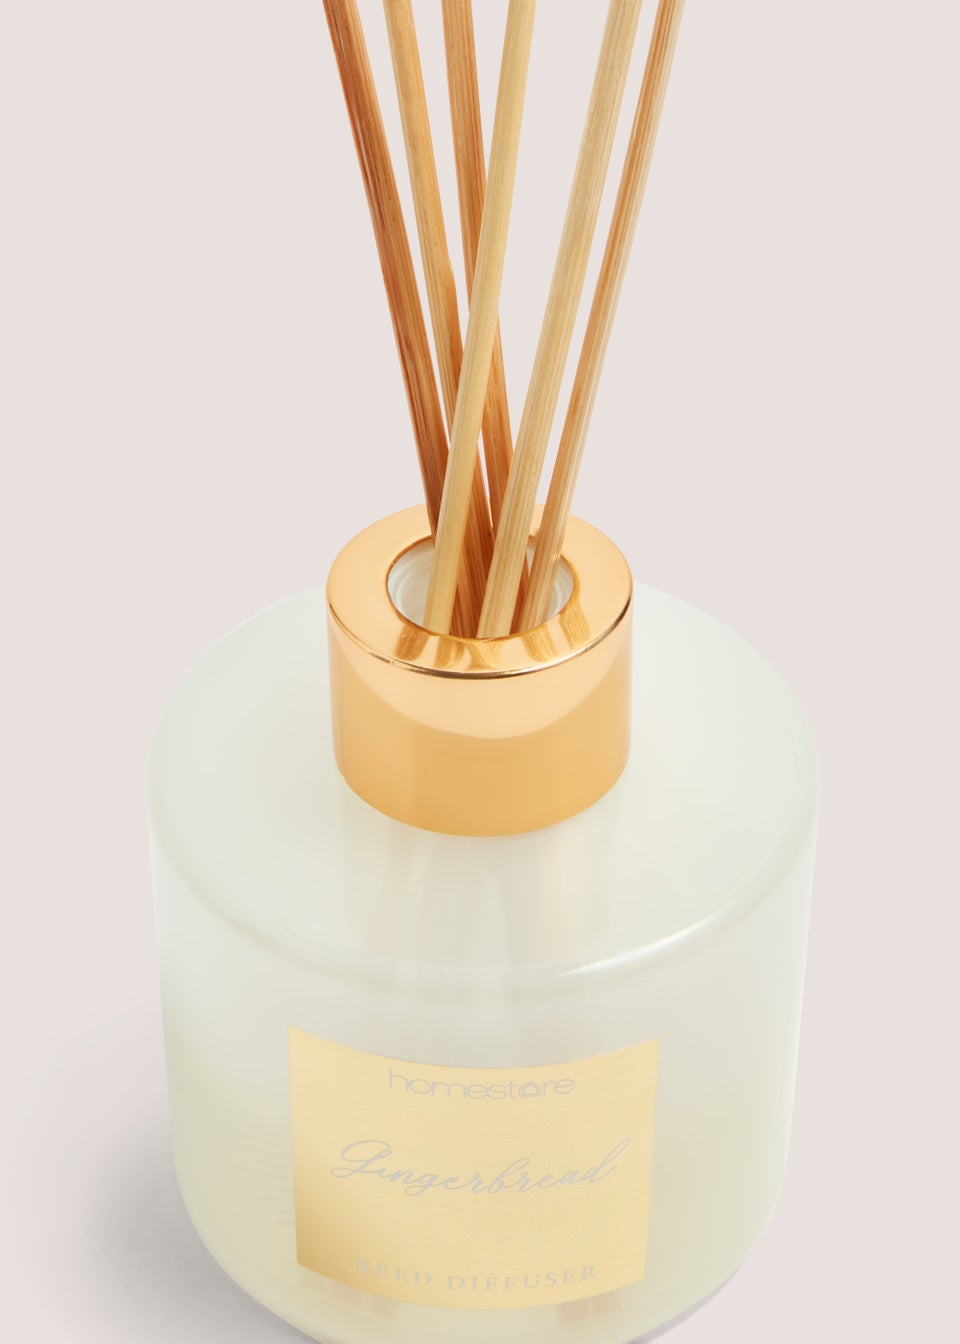 Gingerbread Reed Diffuser (70ml)